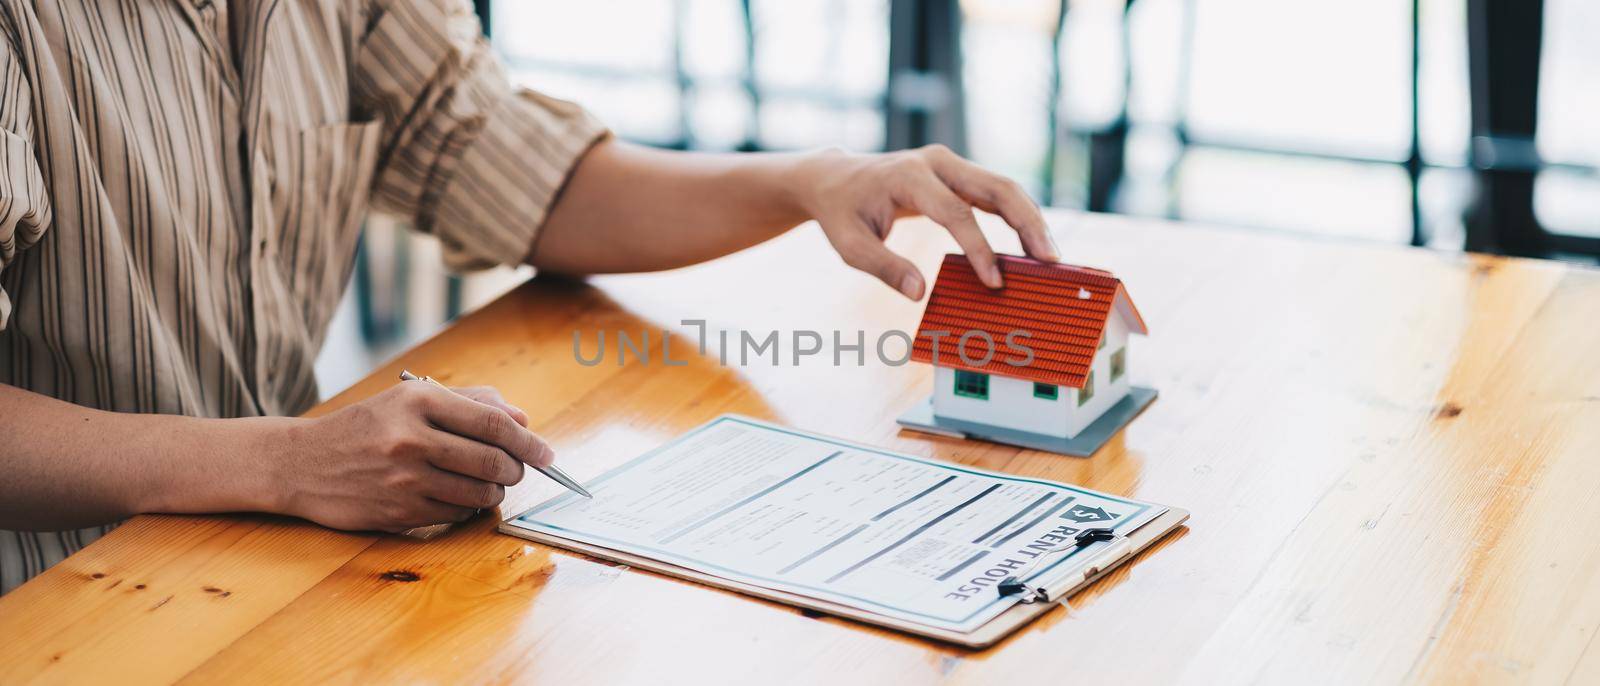 Real estate agent offer hand for customer sign agreement contract signature for buy or sell house. Real estate concept contact agreement concept.